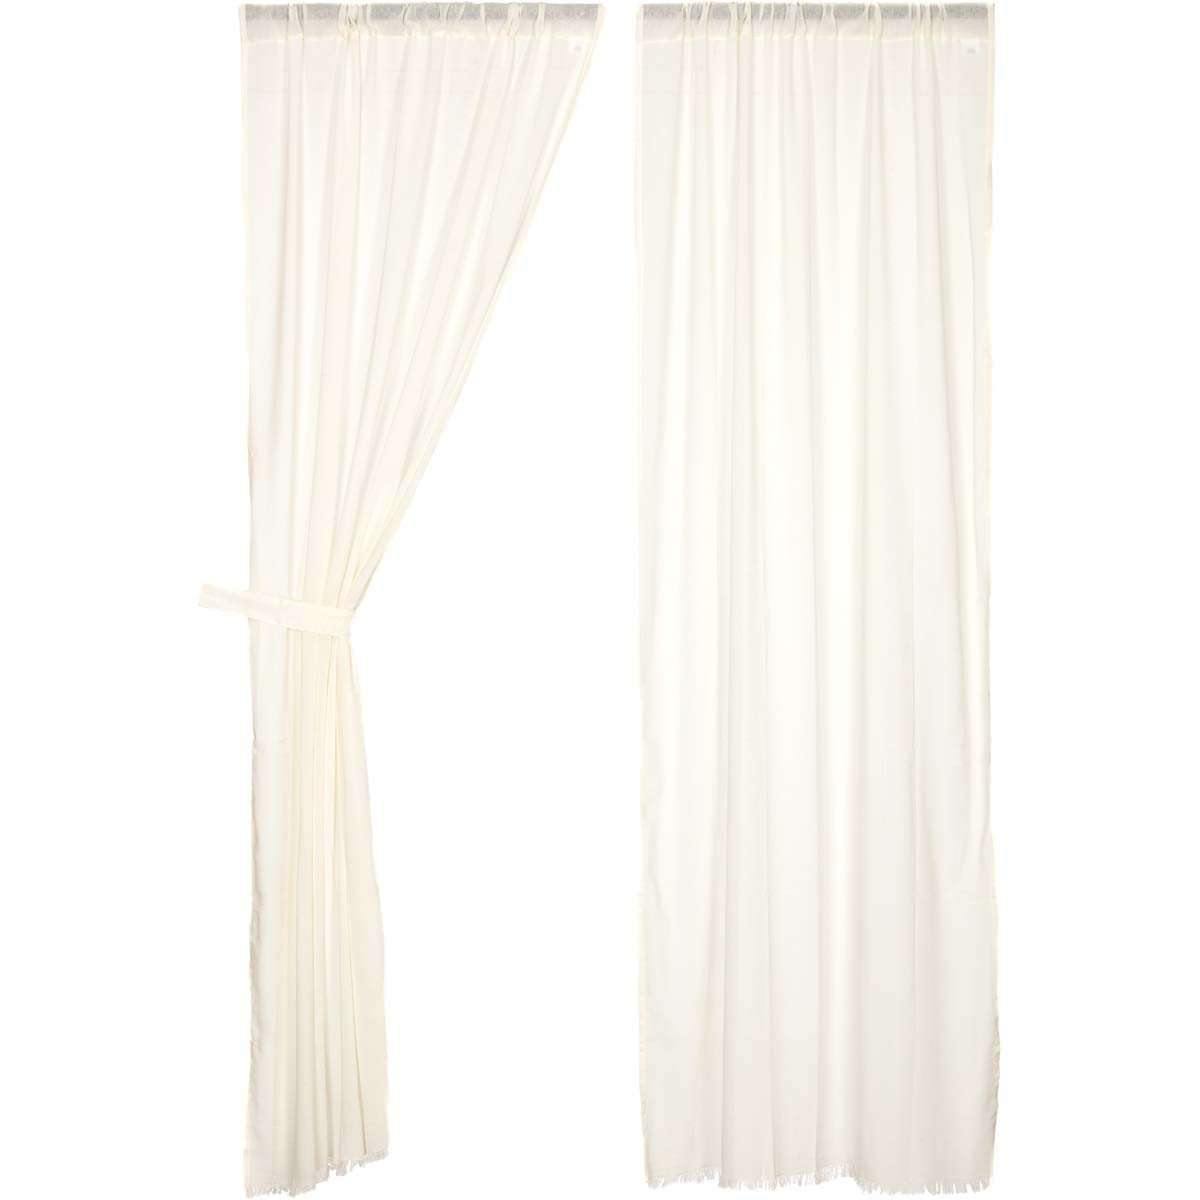 Tobacco Cloth Antique White Panel Curtain Fringed Set of 2 84x40 VHC Brands - The Fox Decor